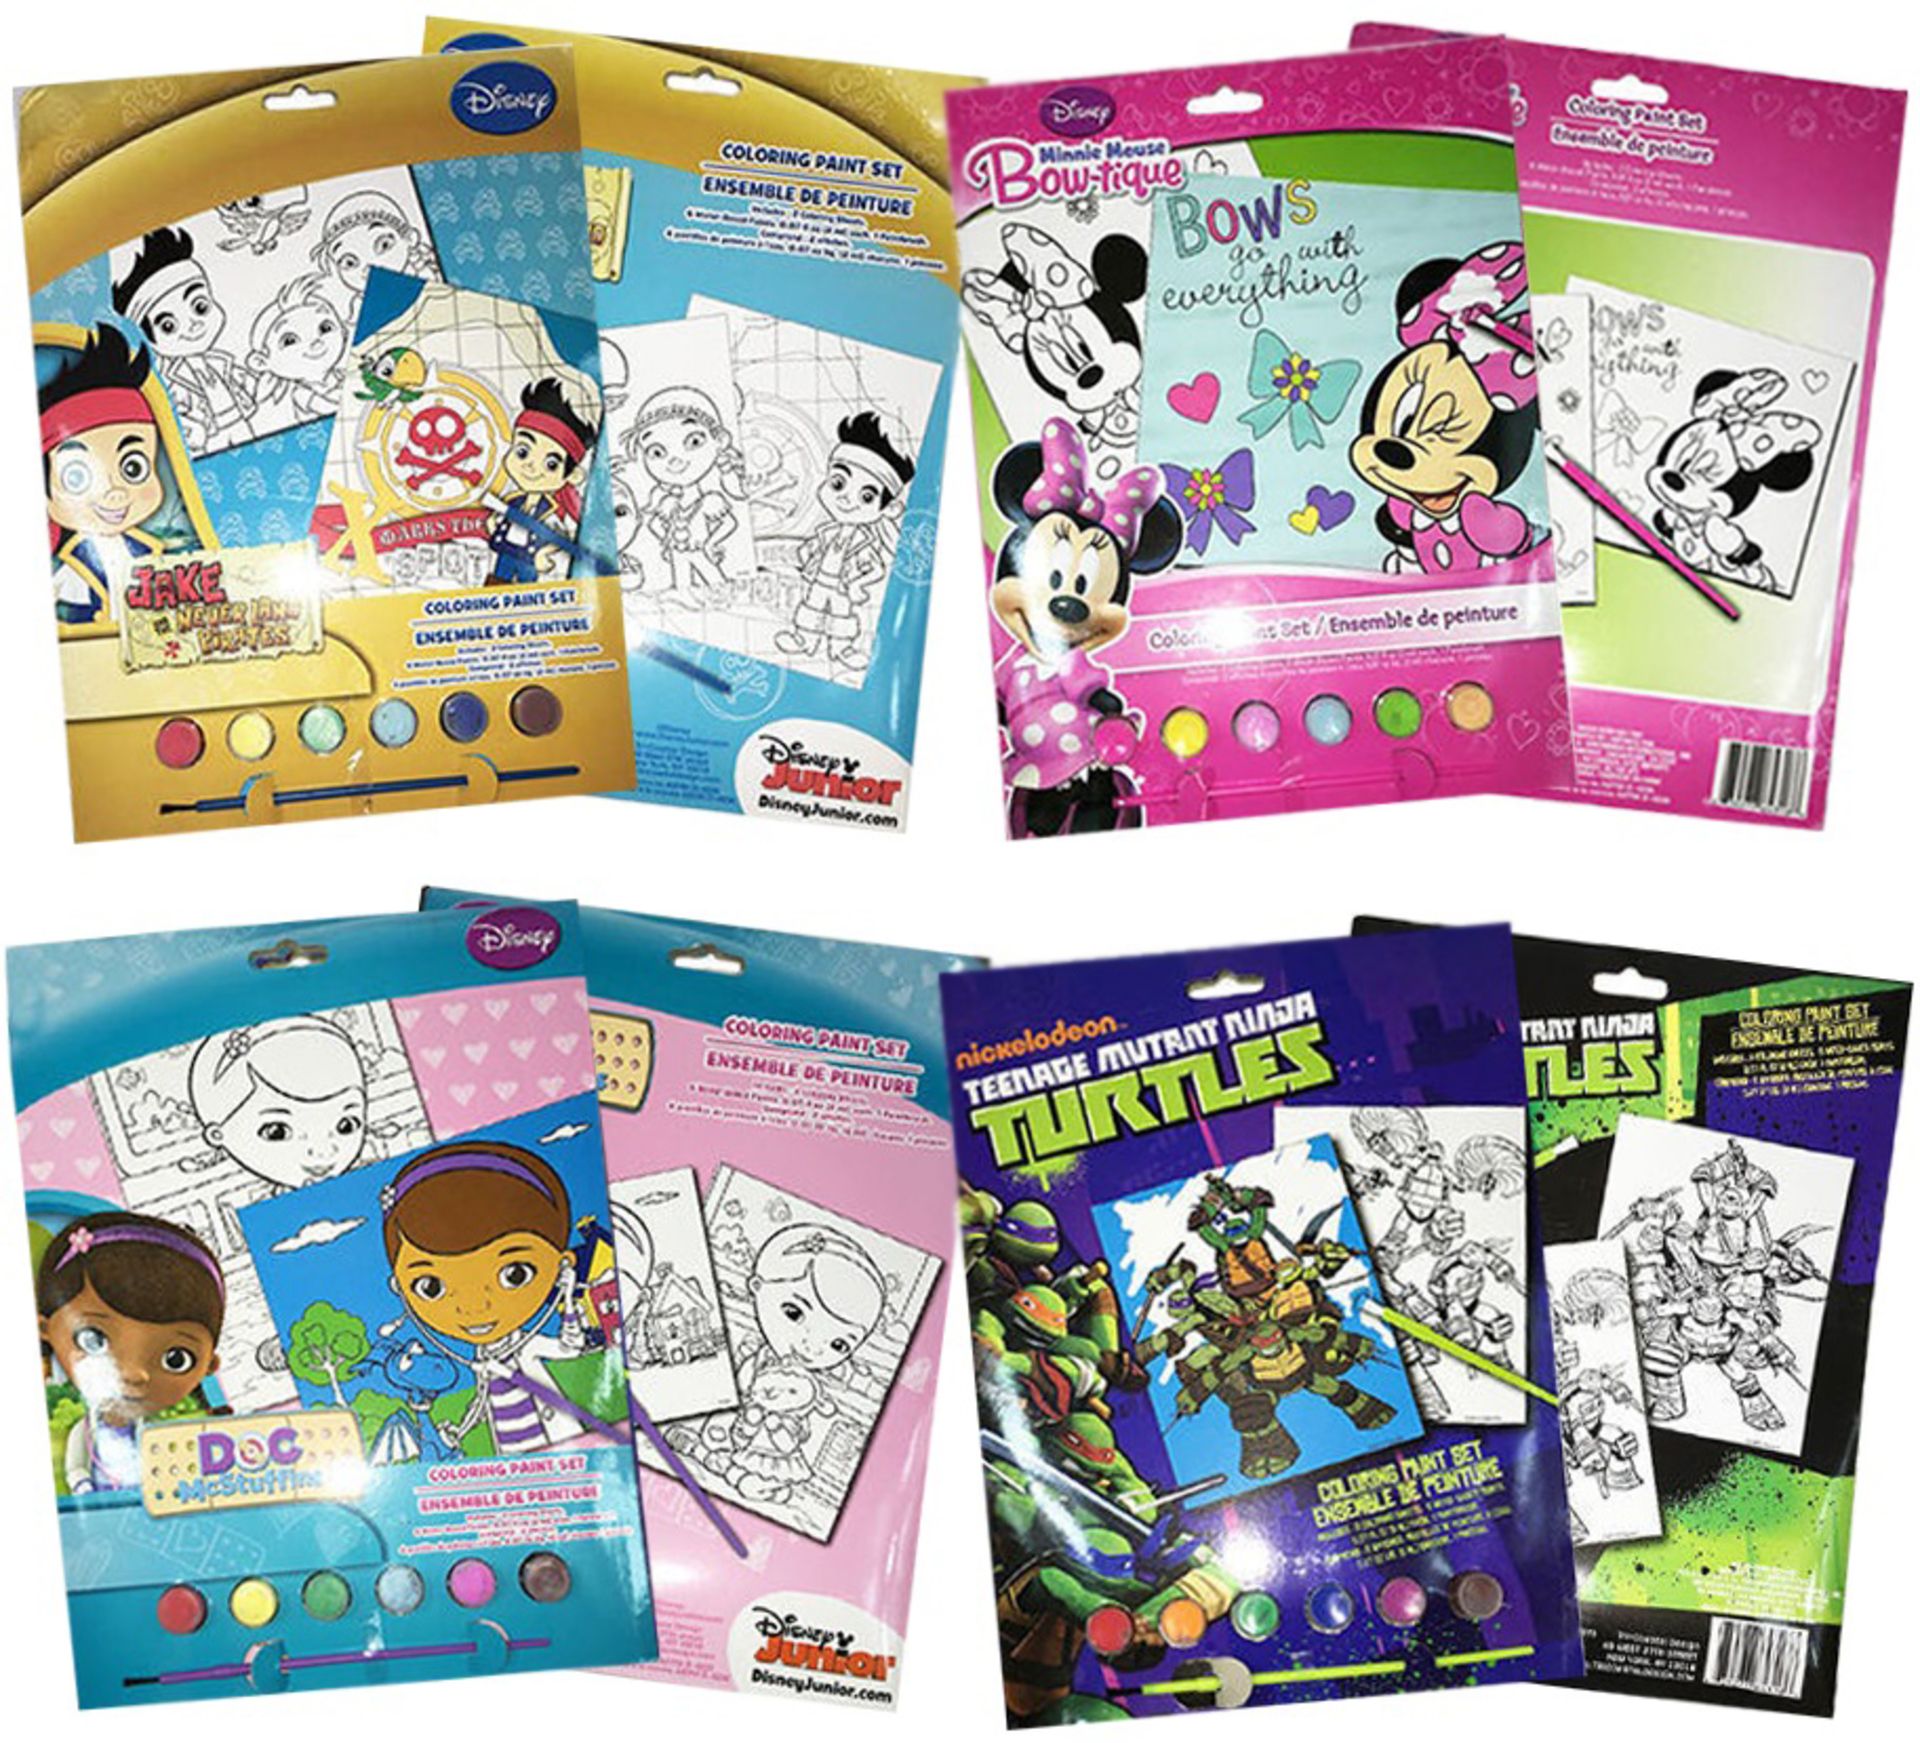 4 x Disney Character Sets Paint by Number Kids Activity Kit with Brushes and Paint for Children at